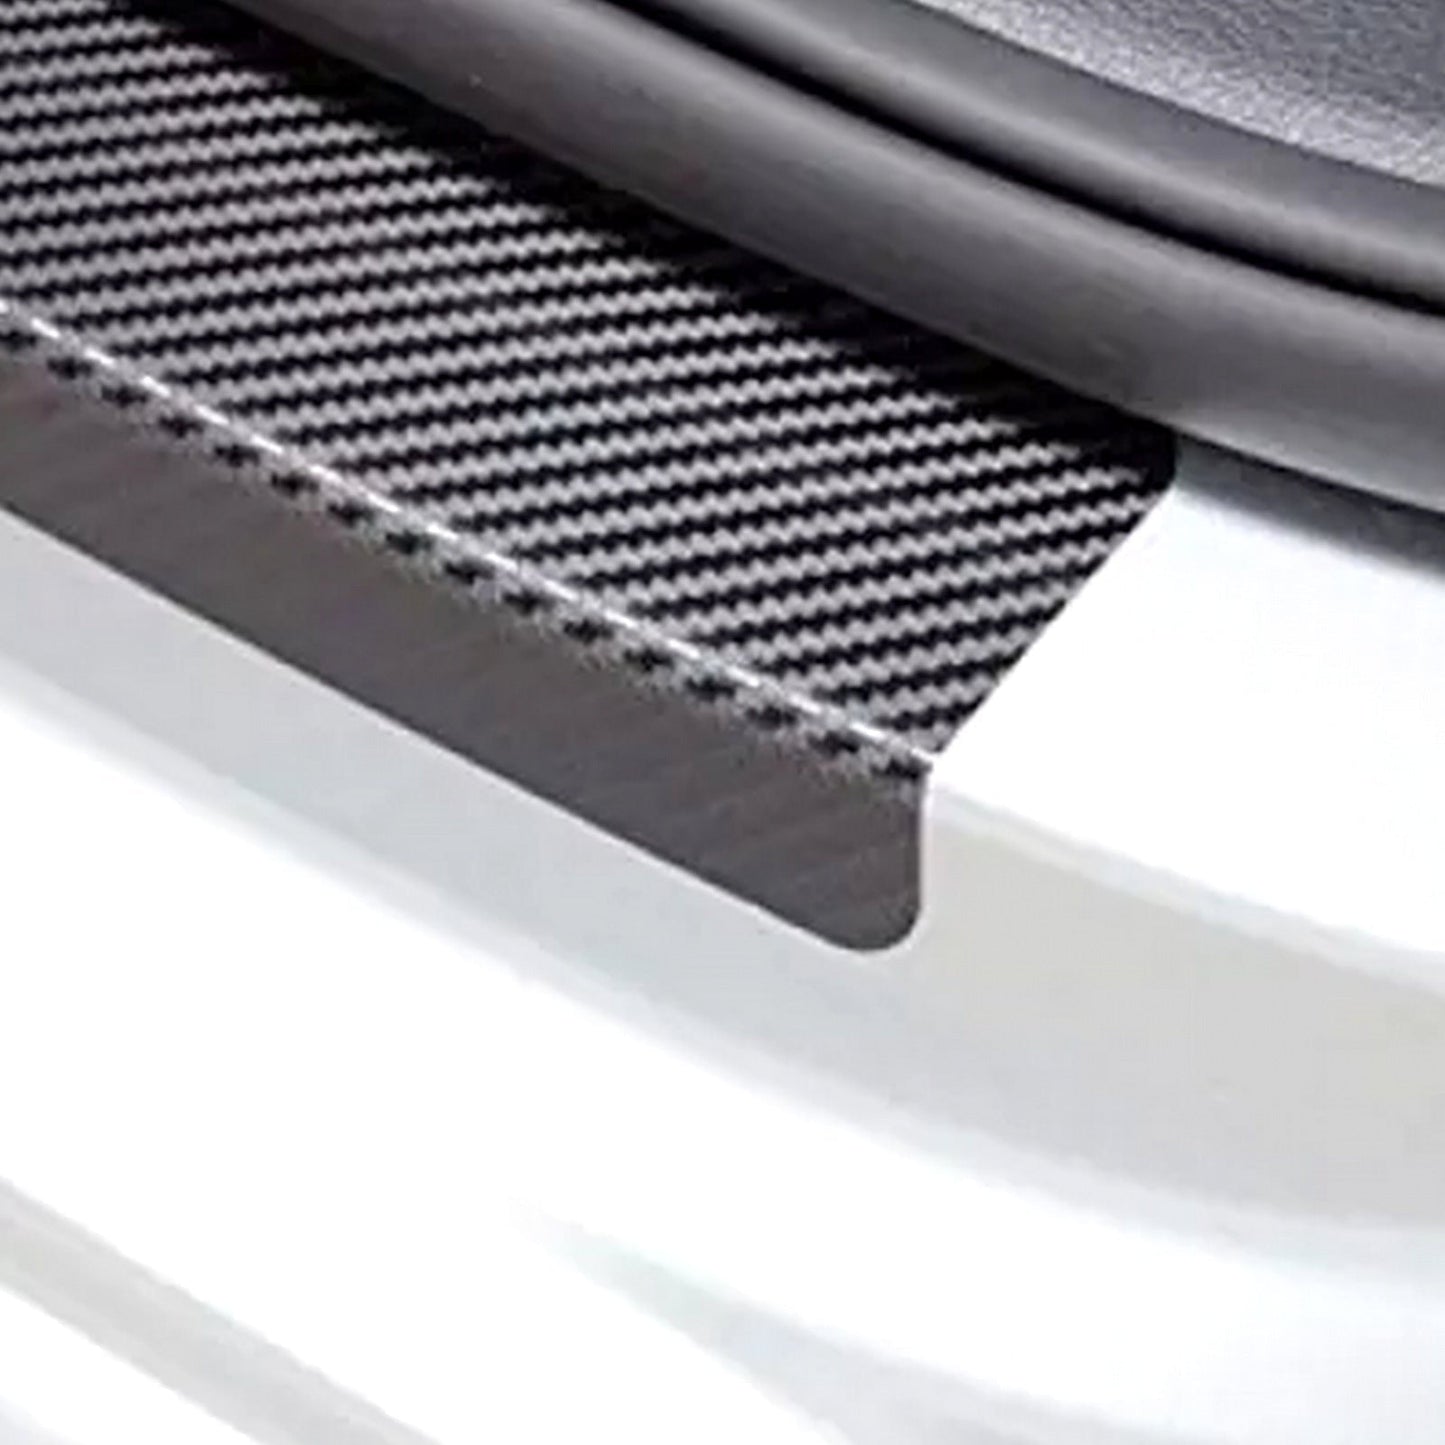 DOOR SILL AREA PROTECTION CARBON FIBER STICKER FOR NISSAN